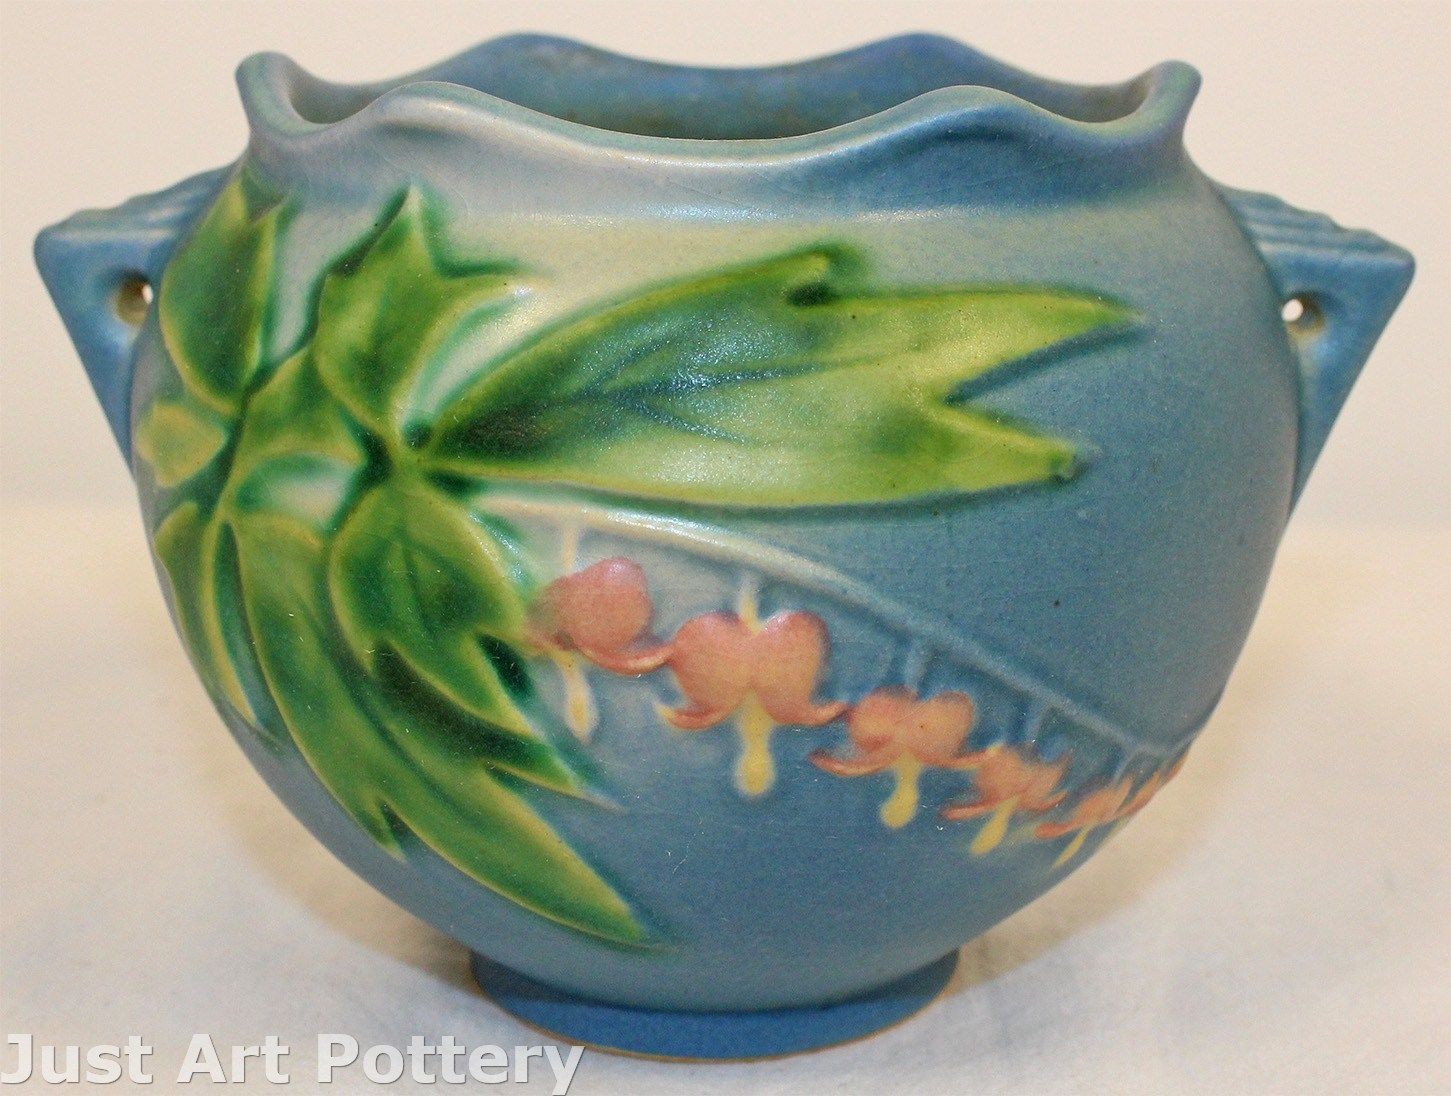 29 attractive Roseville Pottery Dogwood Vase 2024 free download roseville pottery dogwood vase of rookwood pottery 1895 covered box shape 692 baker from j with regard to roseville pottery bleeding heart blue jardiniere 651 3 from just art pottery